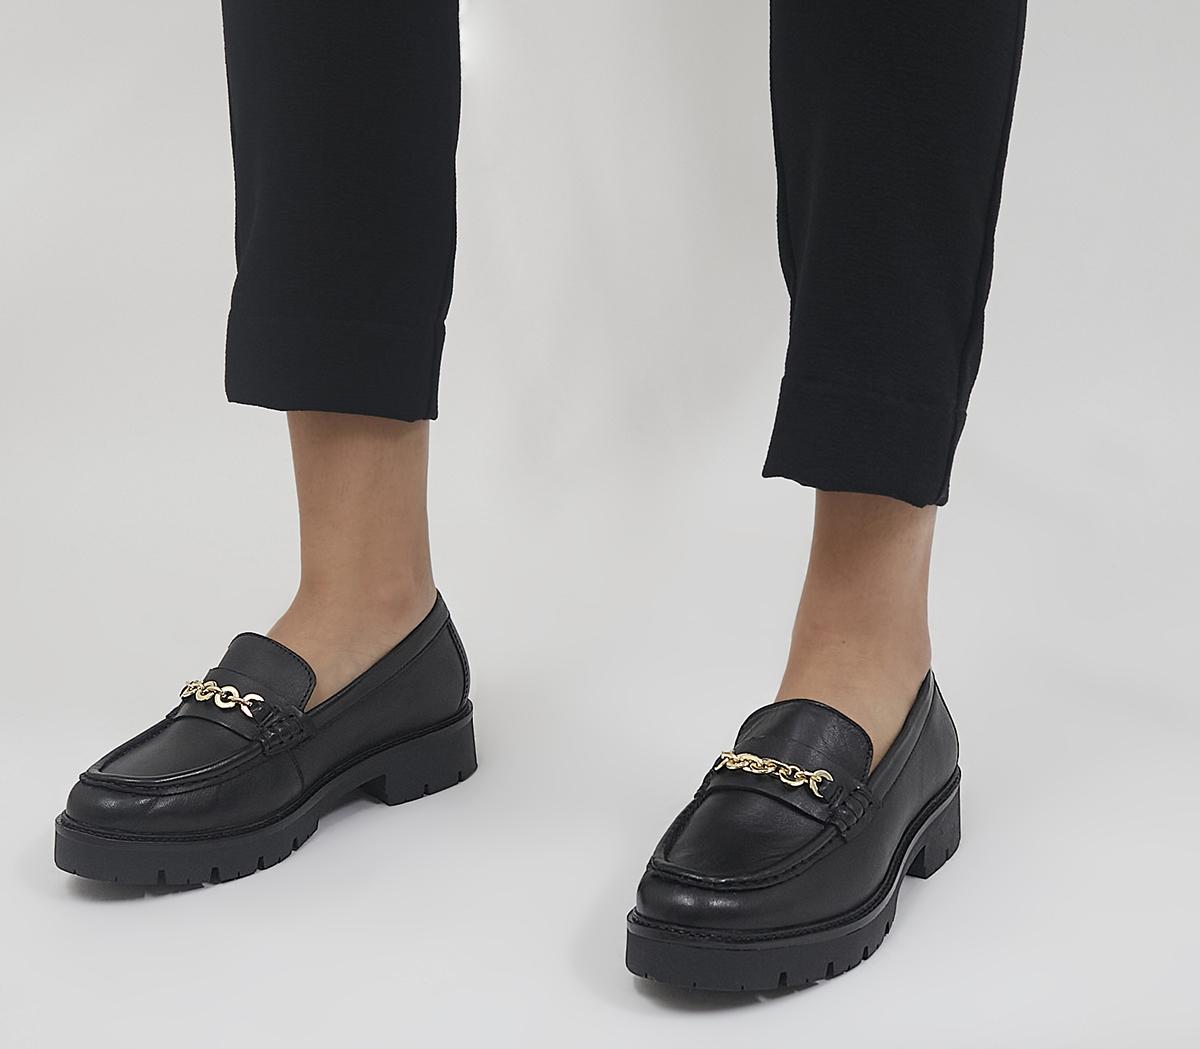 Frame Loafers Black Leather Flat Shoes for Women